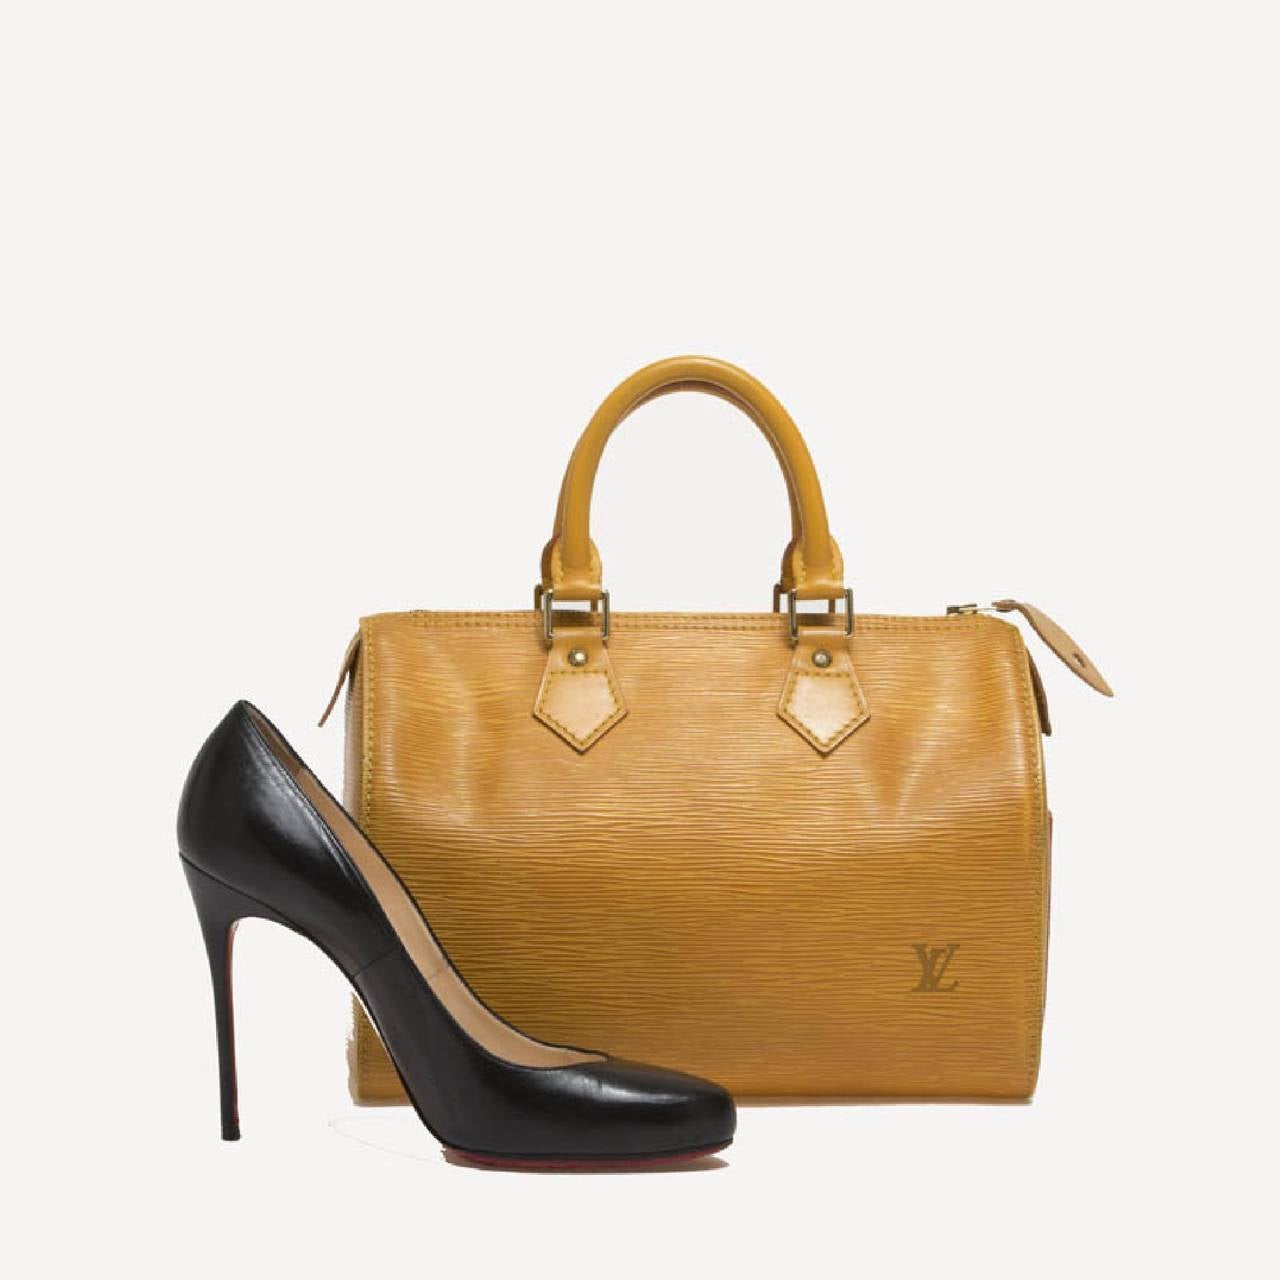 This authentic Louis Vuitton Speedy in Tassil Yellow Epi Leather size 25 is a bright and fun twist on the classic Louis Vuitton speedy design. The rounded bag construction with an exterior side pocket is ultra-spacious making it ideal for daily use.